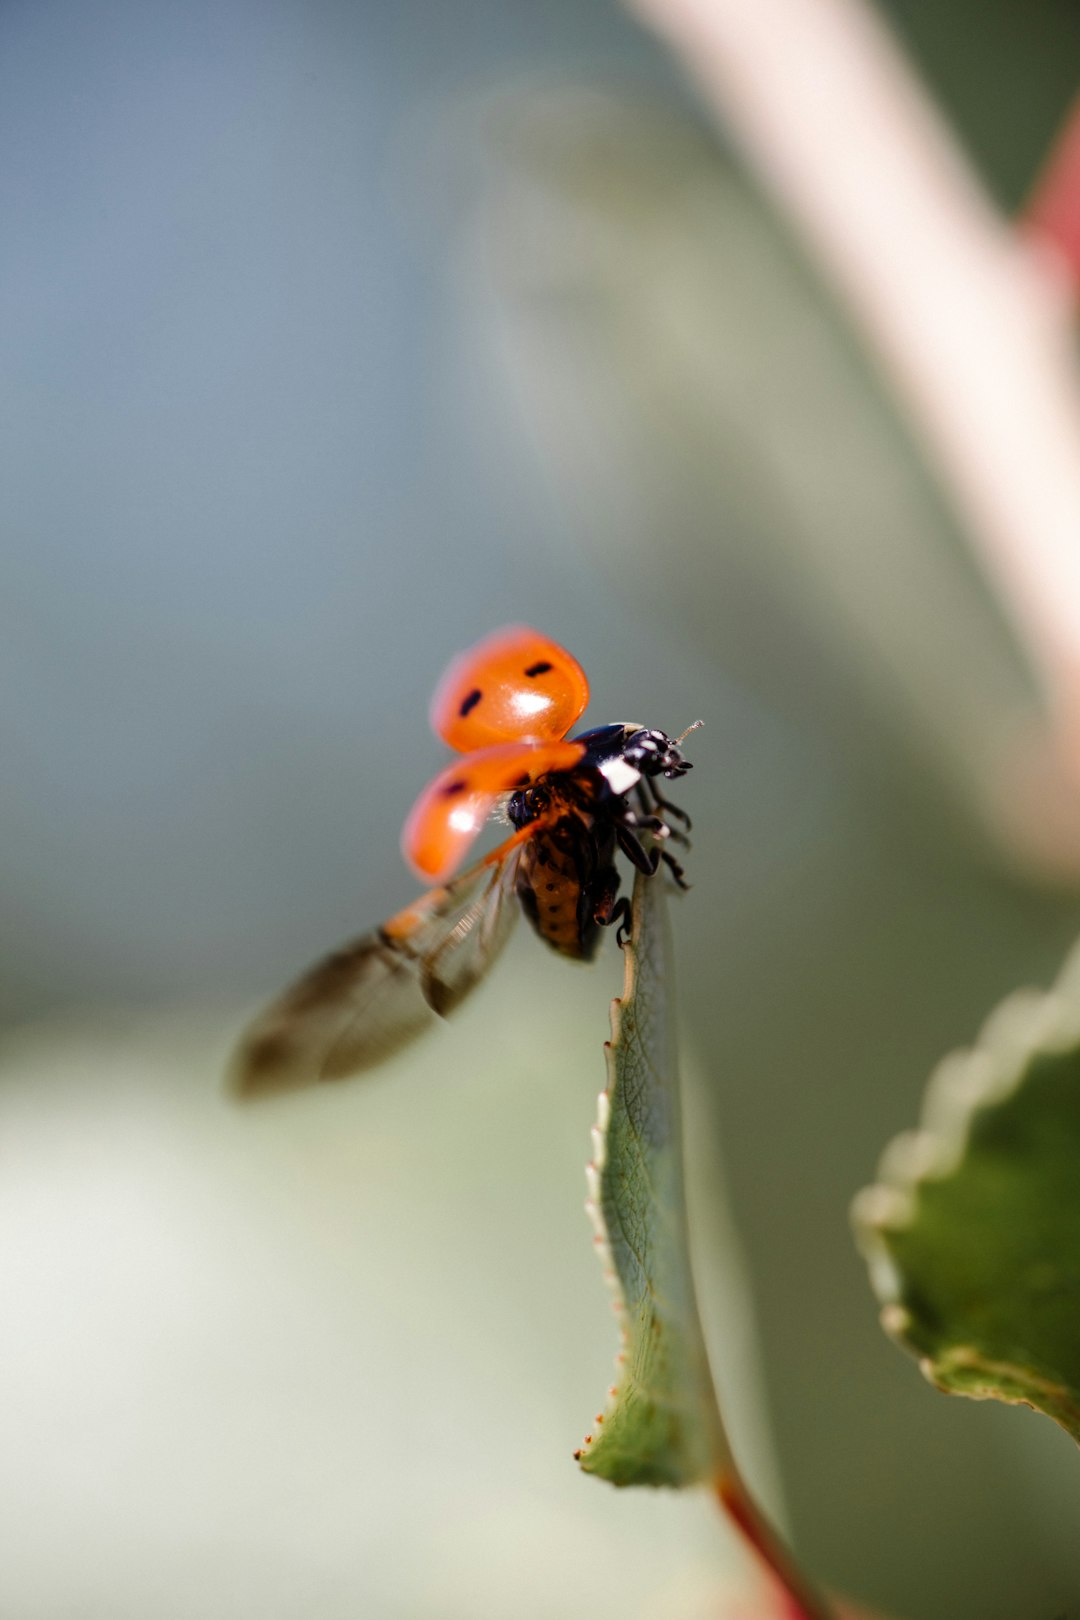 red ladybug perched on green leaf in close up photography during daytime